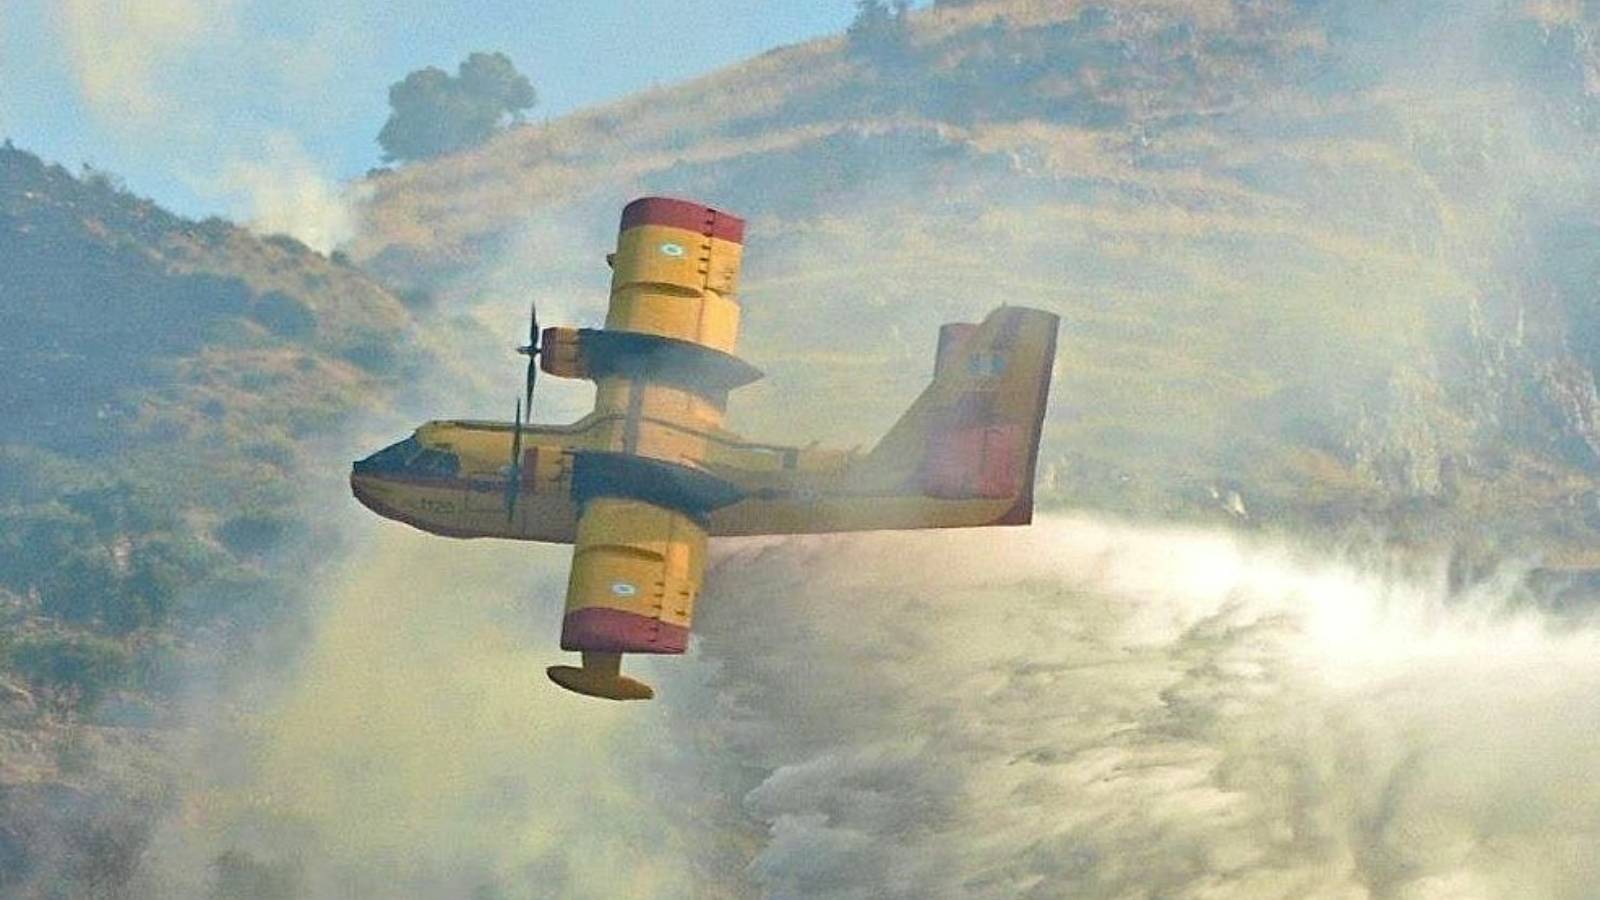 NATO Helps Emergency Services in the Fight Against Vegetation Fires